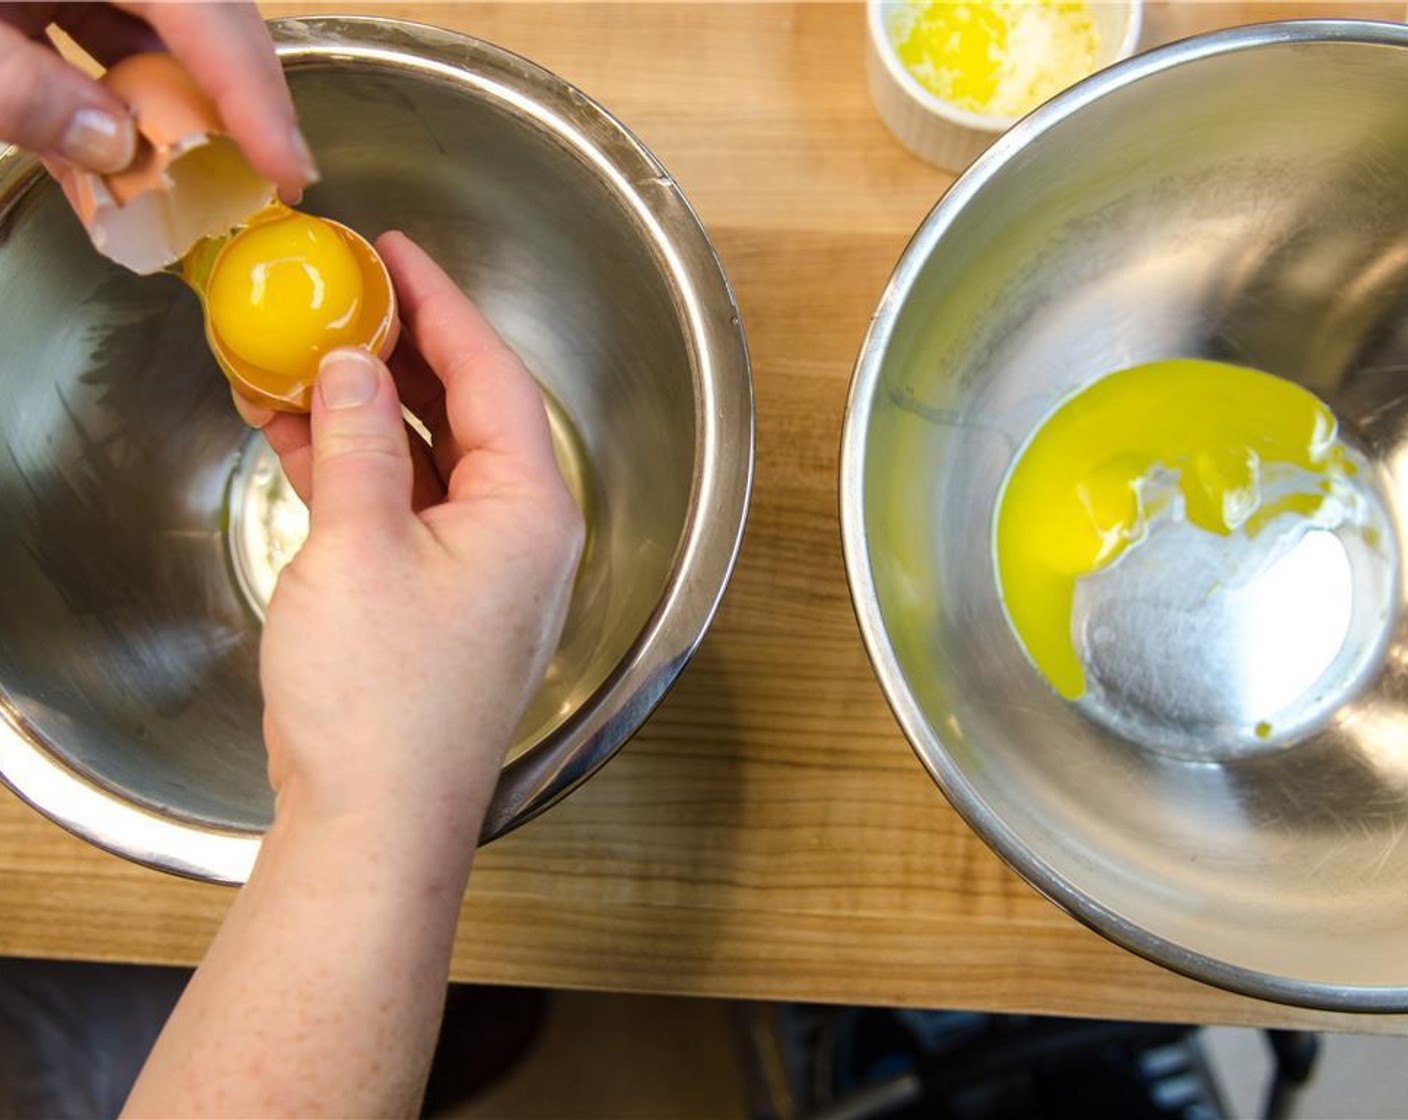 step 1 Melt the Unsalted Butter (2 Tbsp) and crack the Eggs (2) to separate the yolks and whites into two separate medium-size bowls.